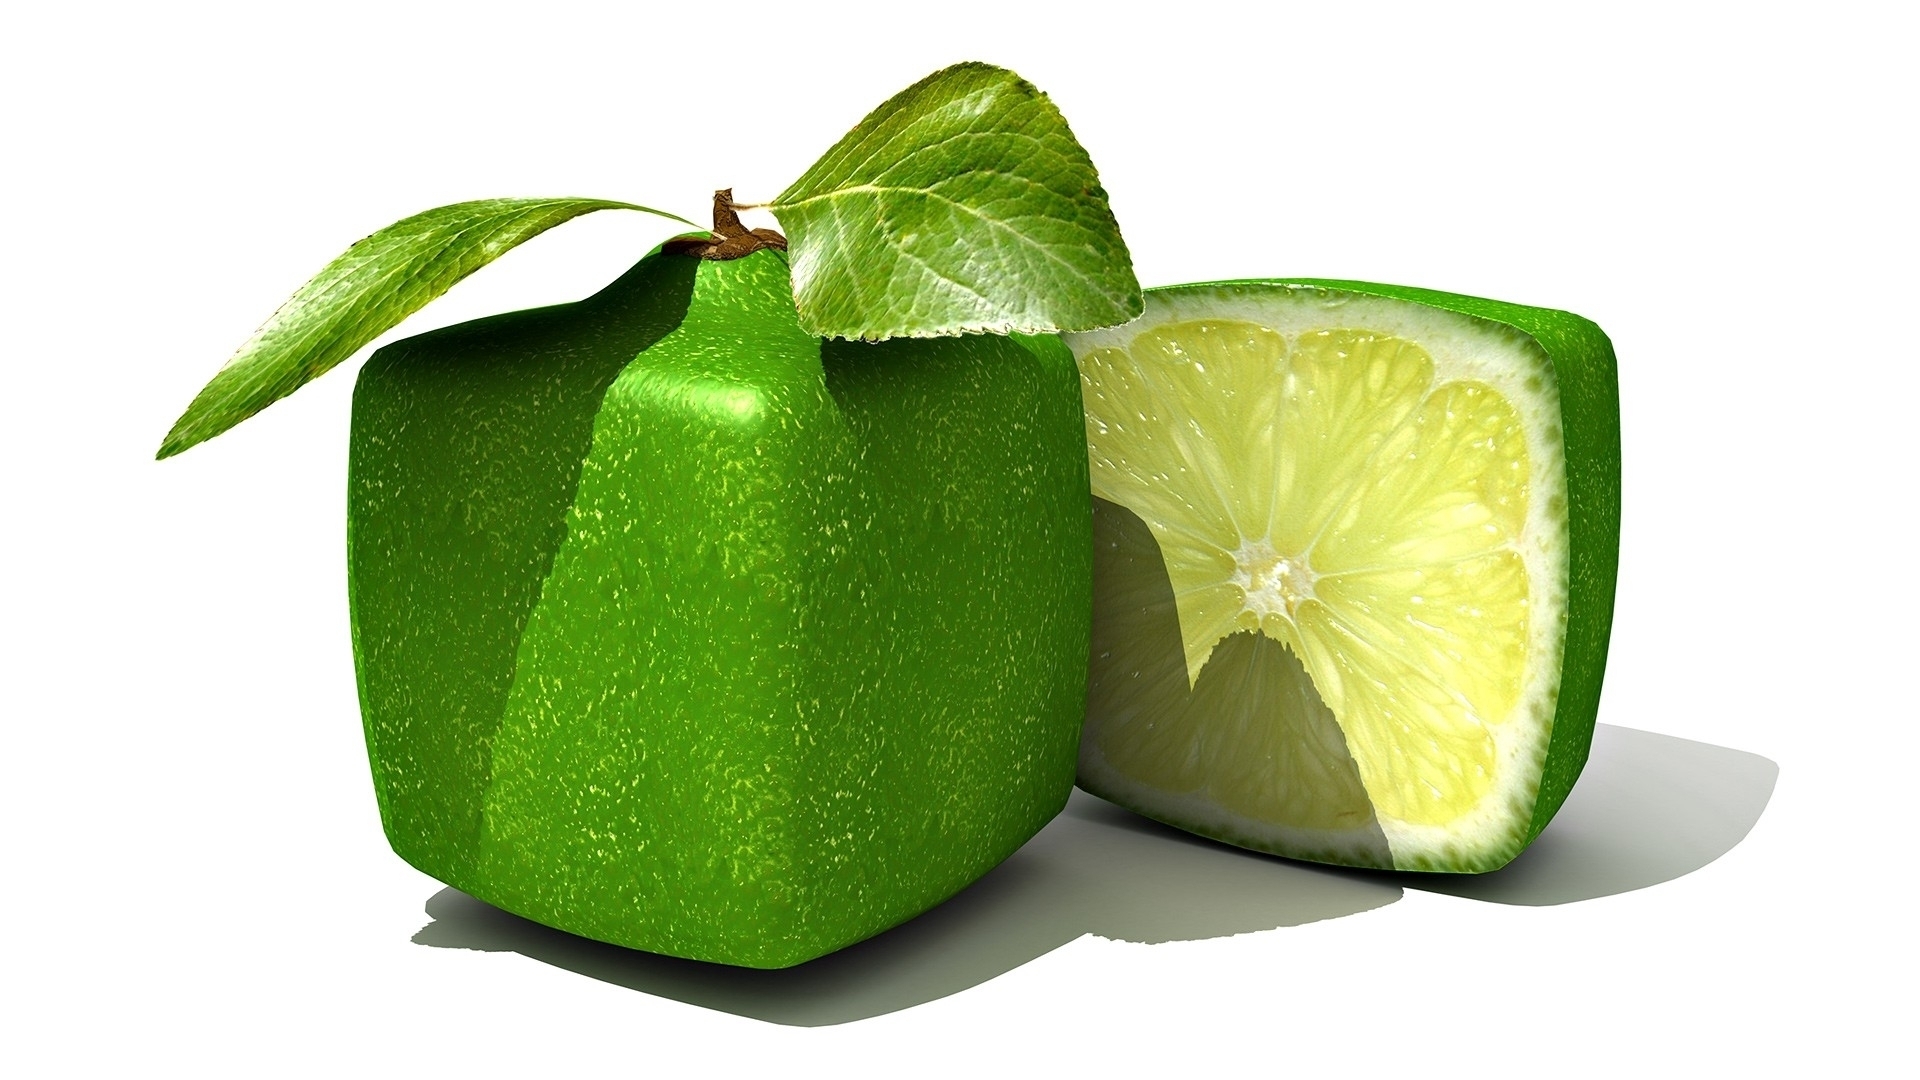 Square Limes for 1920 x 1080 HDTV 1080p resolution